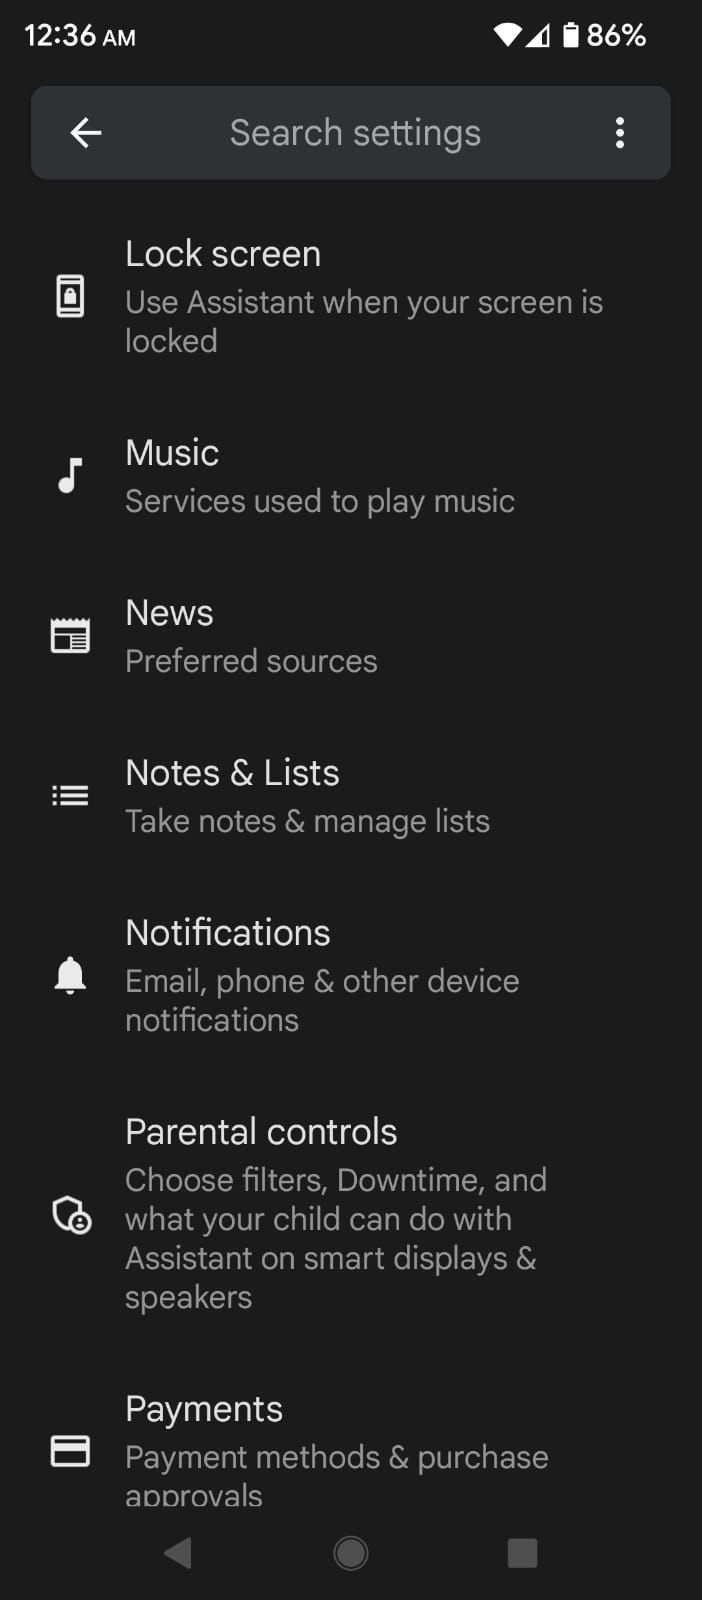 Notes and Lists option in the Assistant Settings